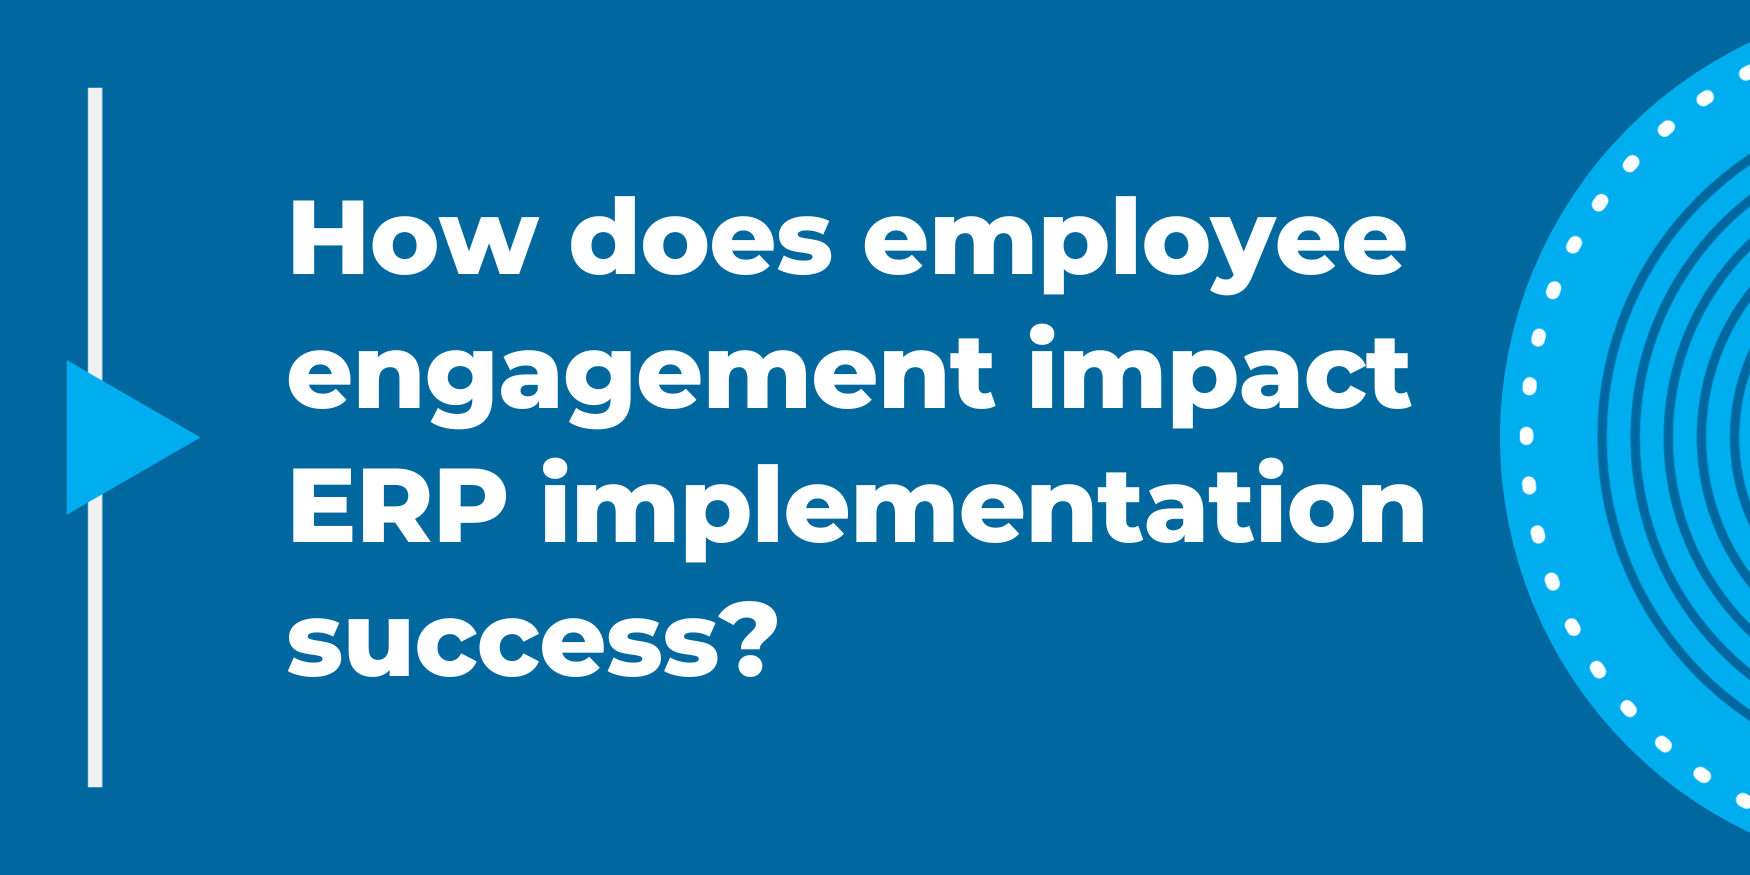 How does employee engagement impact ERP implementation success?